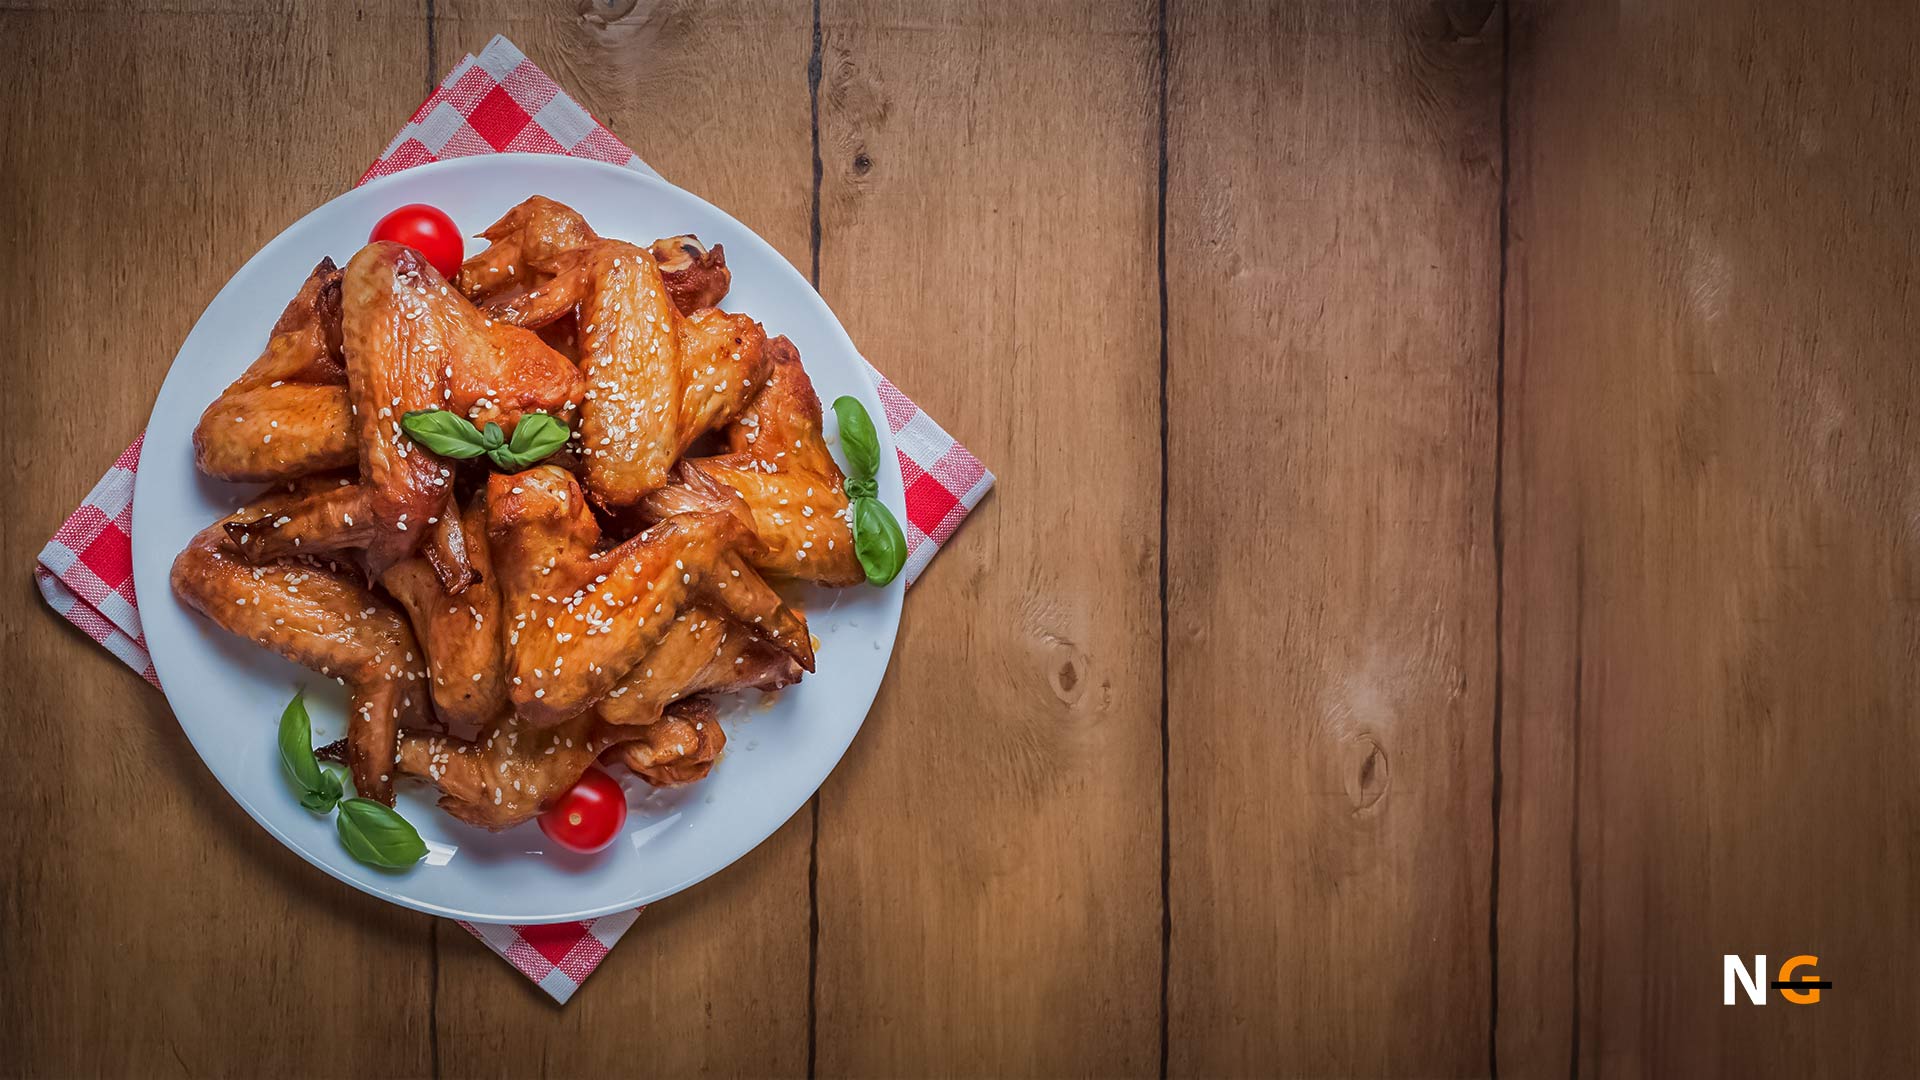 Frank's Redhot Hot & Tangy Wings